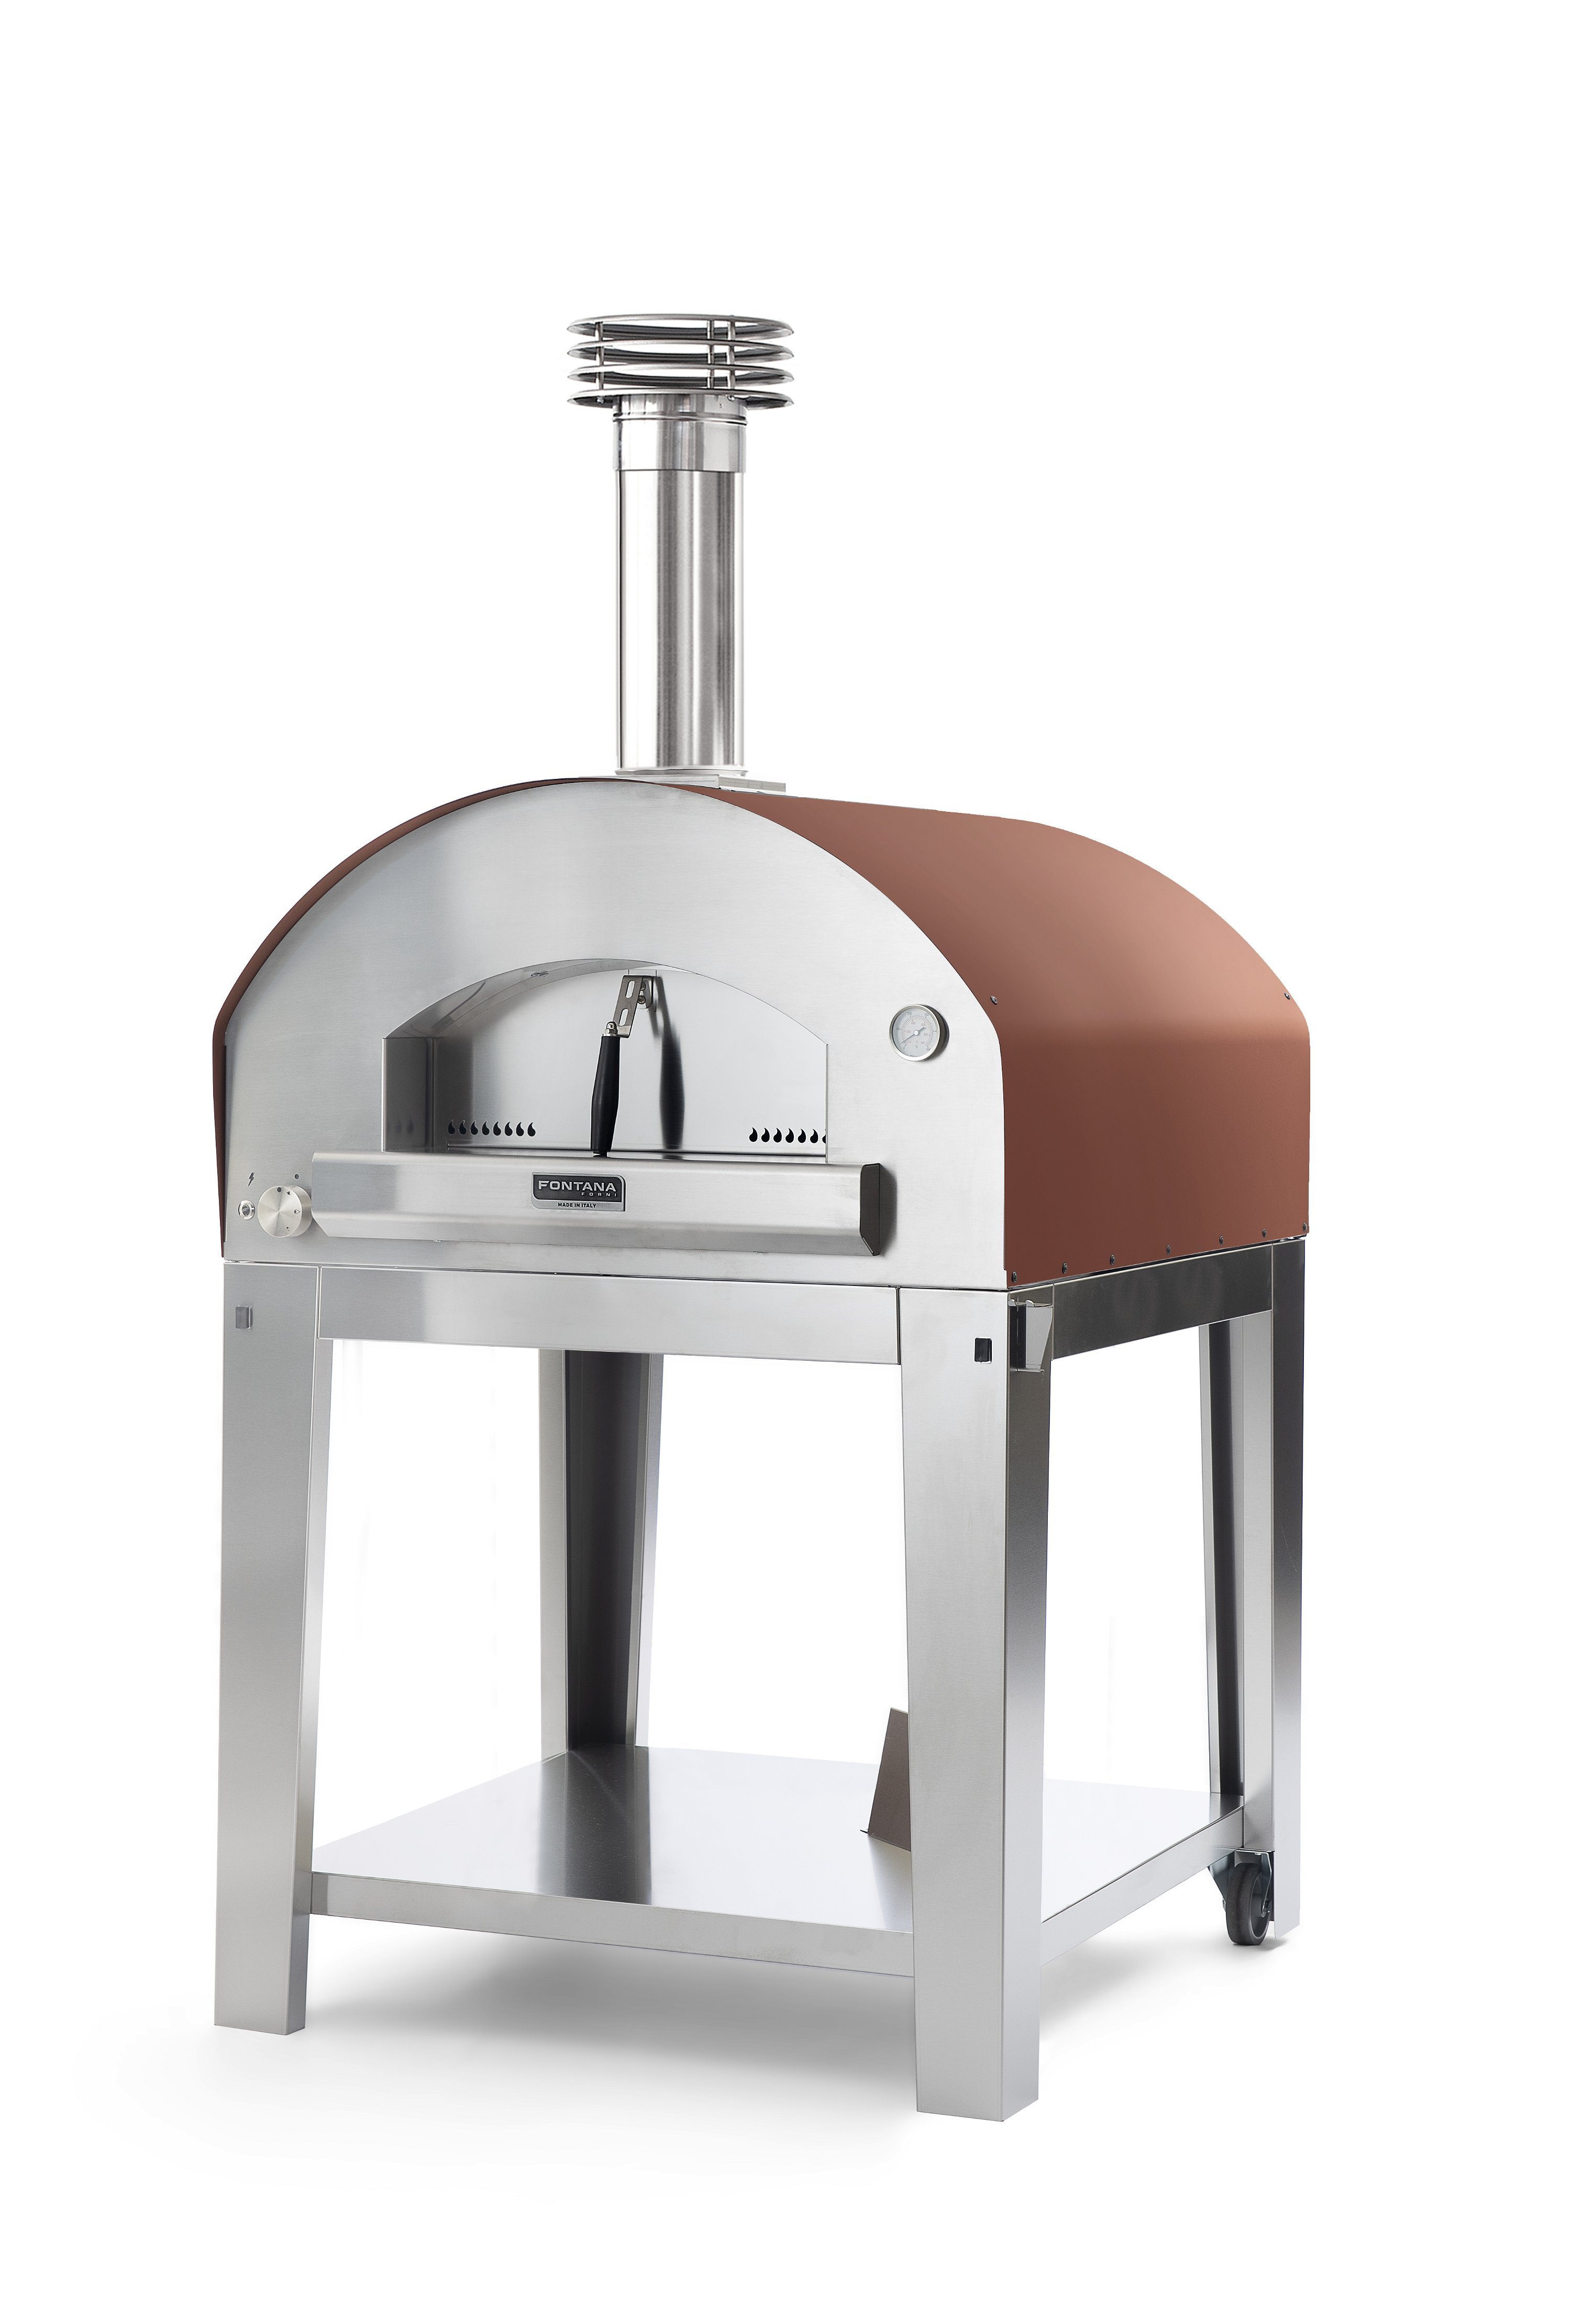 Dome oven Fontana Marinara, stainless steel pizza oven with gas firing, red